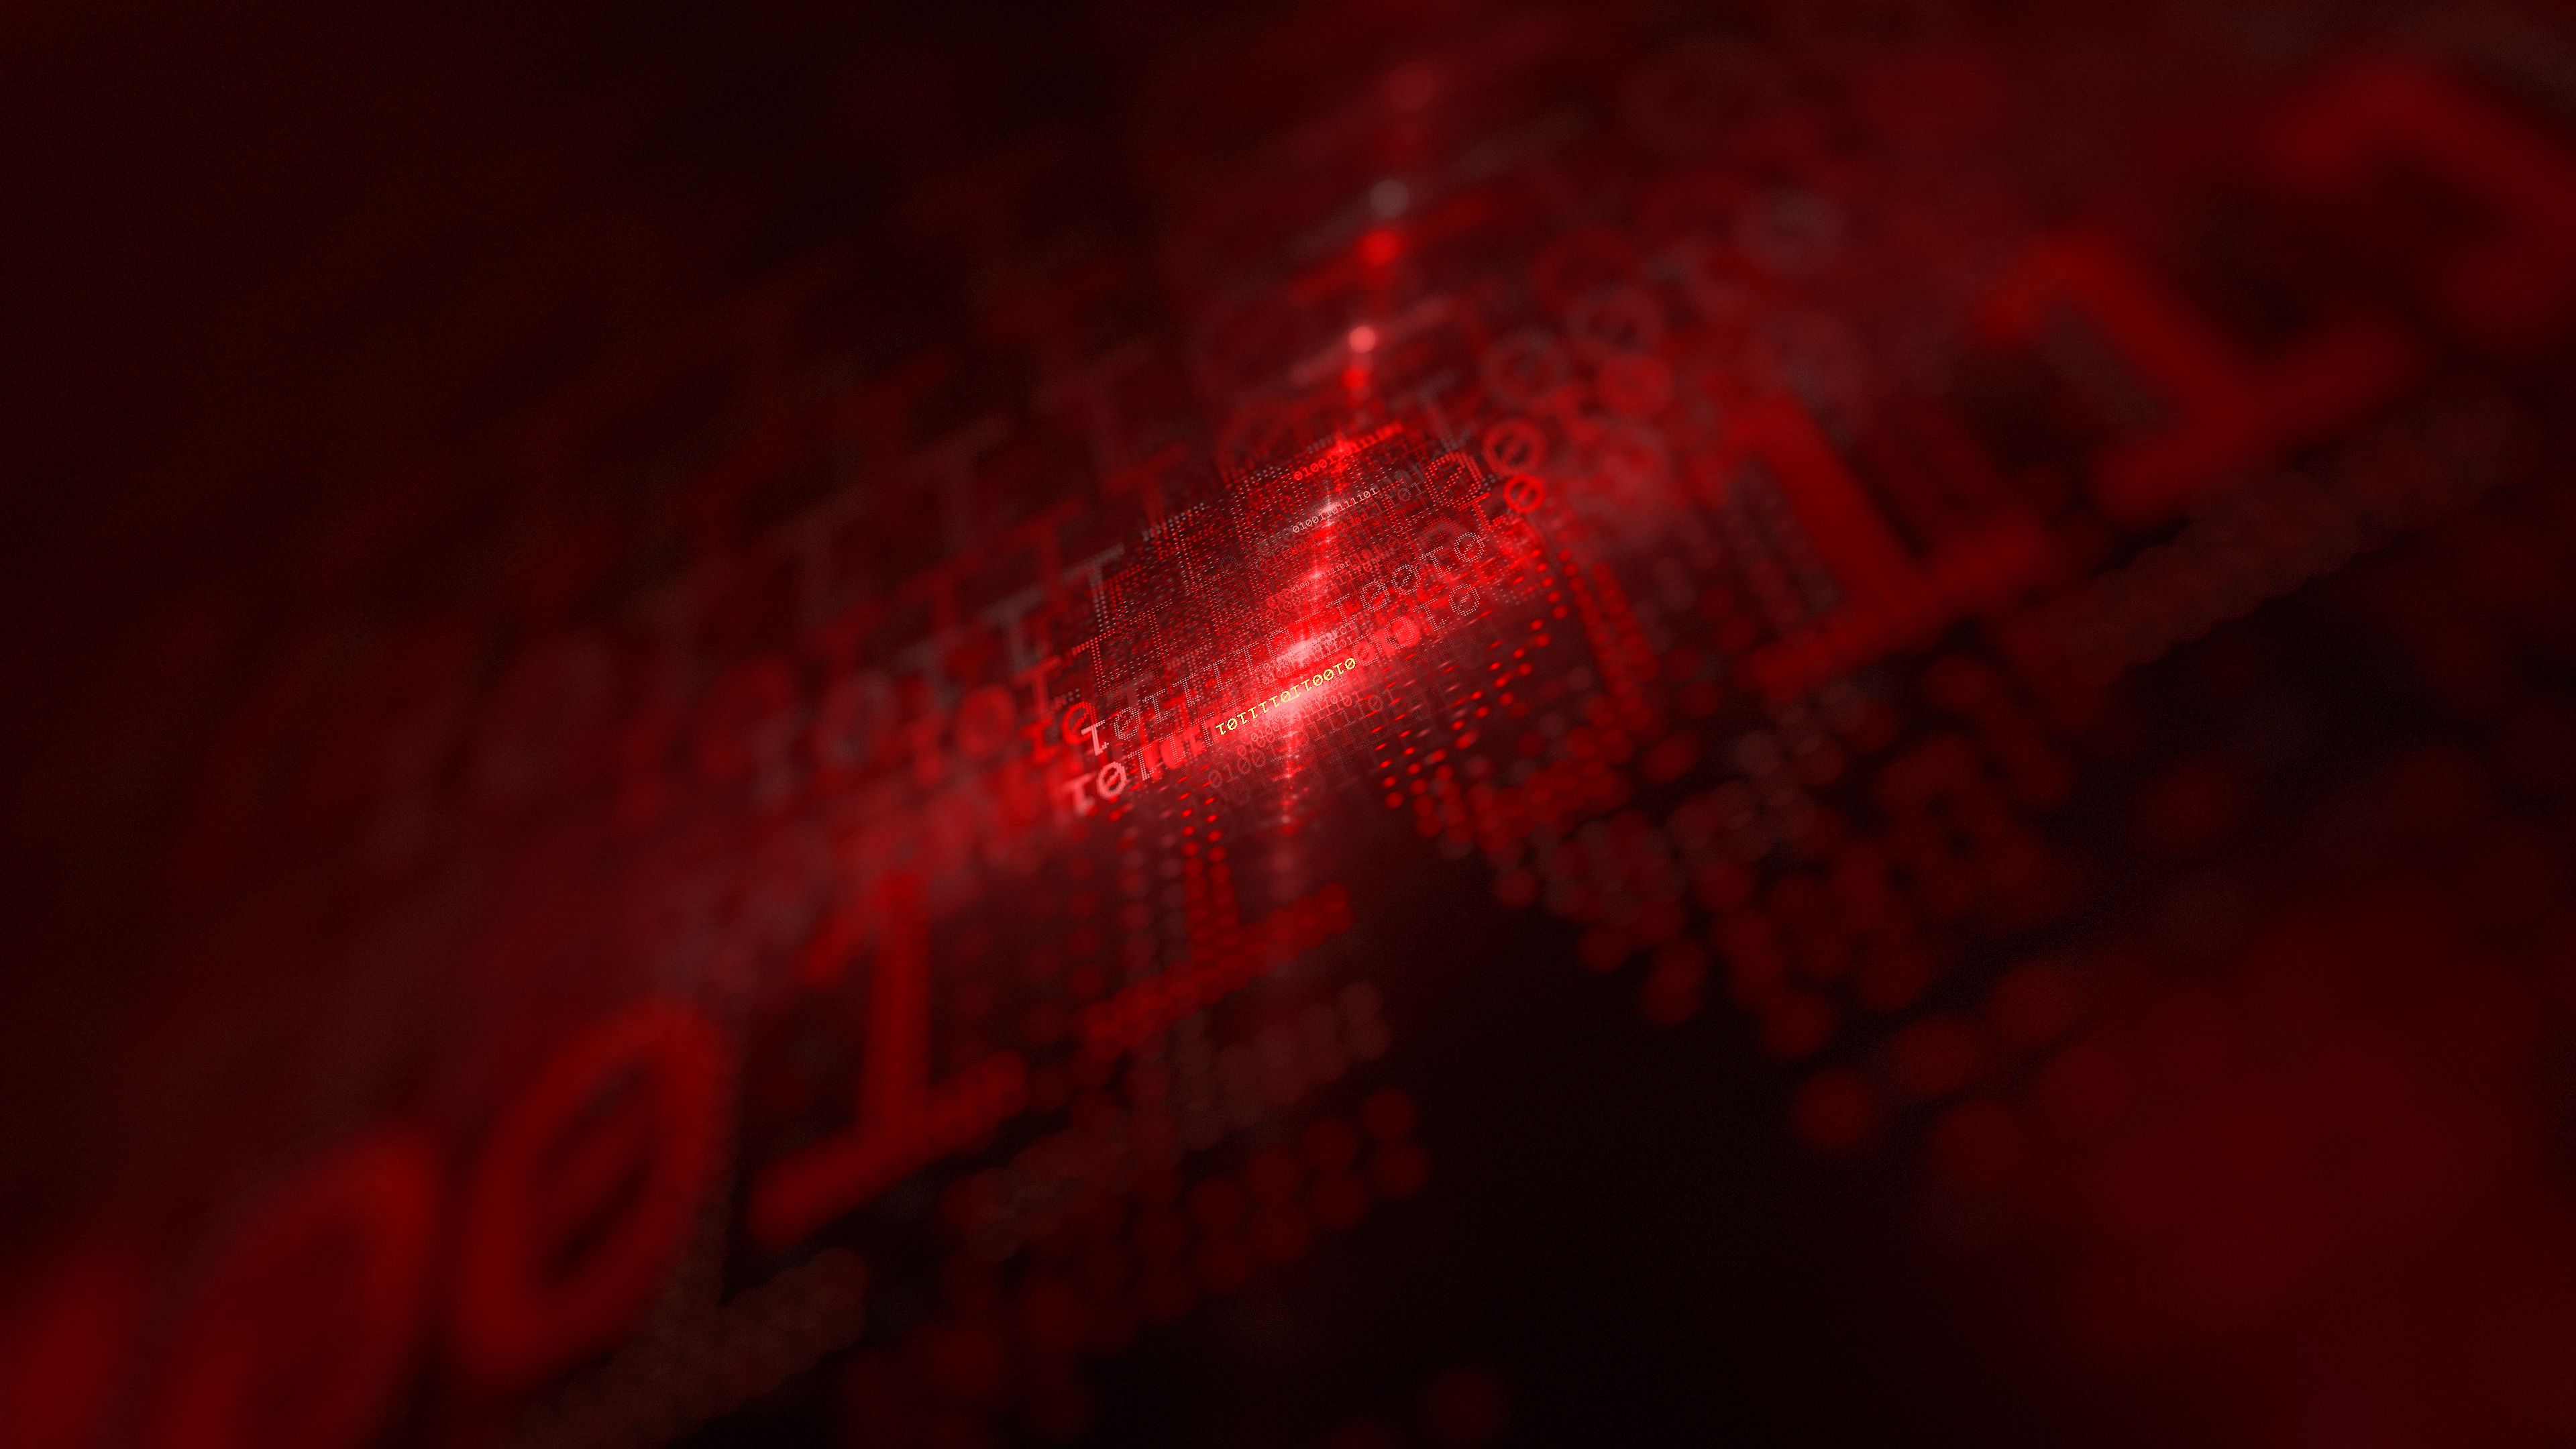 107036 download wallpaper red, abstract, matrix, code, glow, numbers screensavers and pictures for free